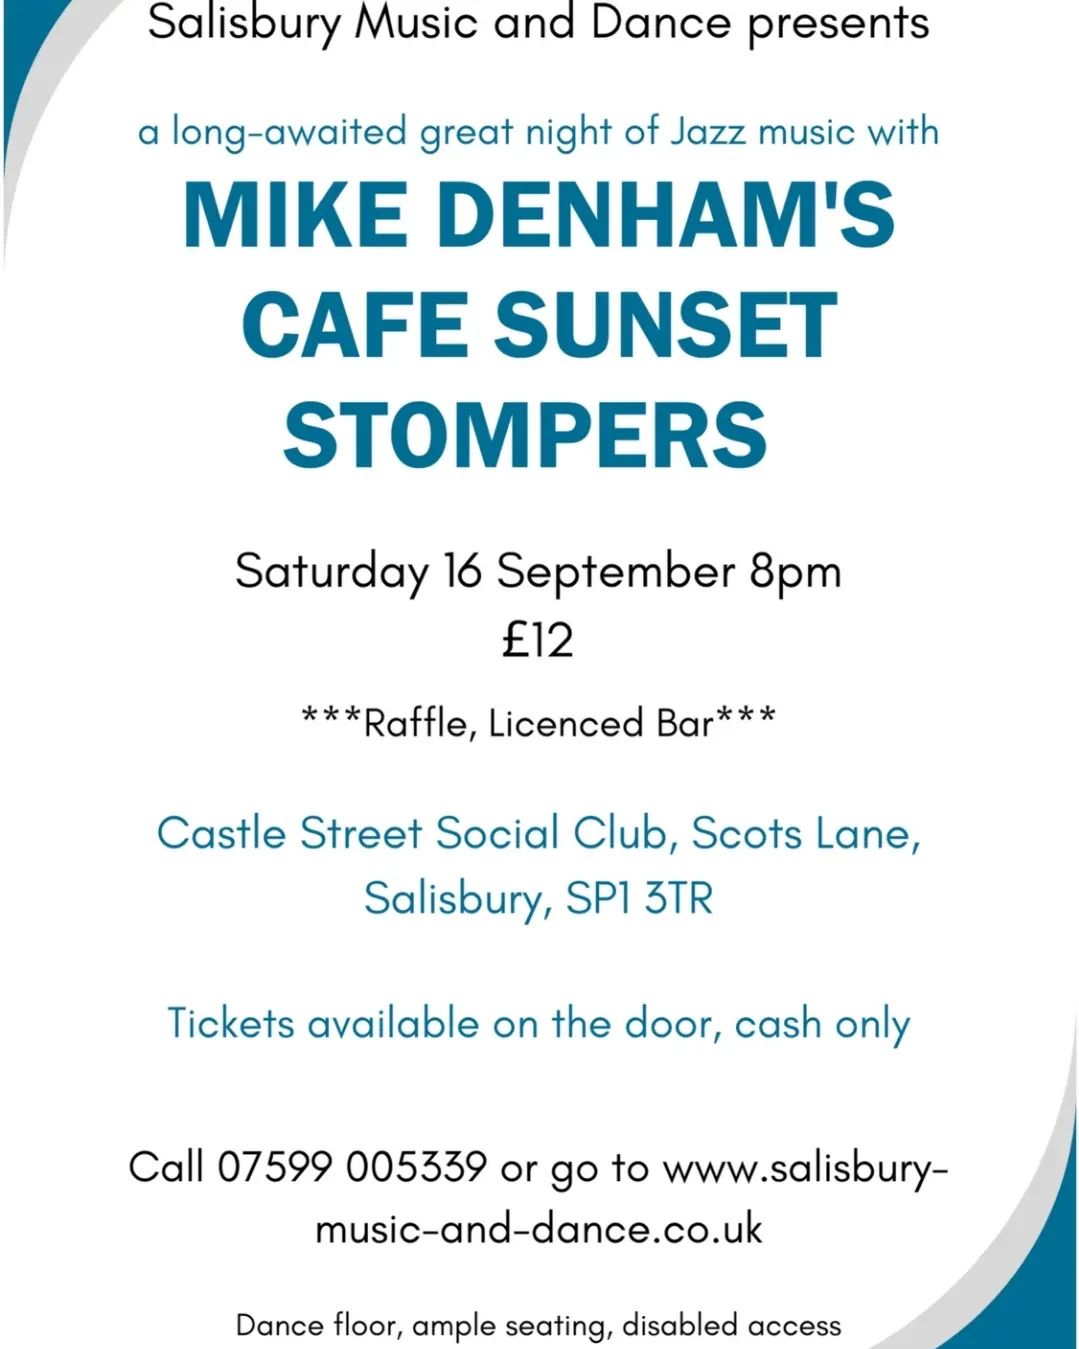 Salisbury Music and Dance presents MIKE DENHAM'S CAFE SUNSET STOMPERS